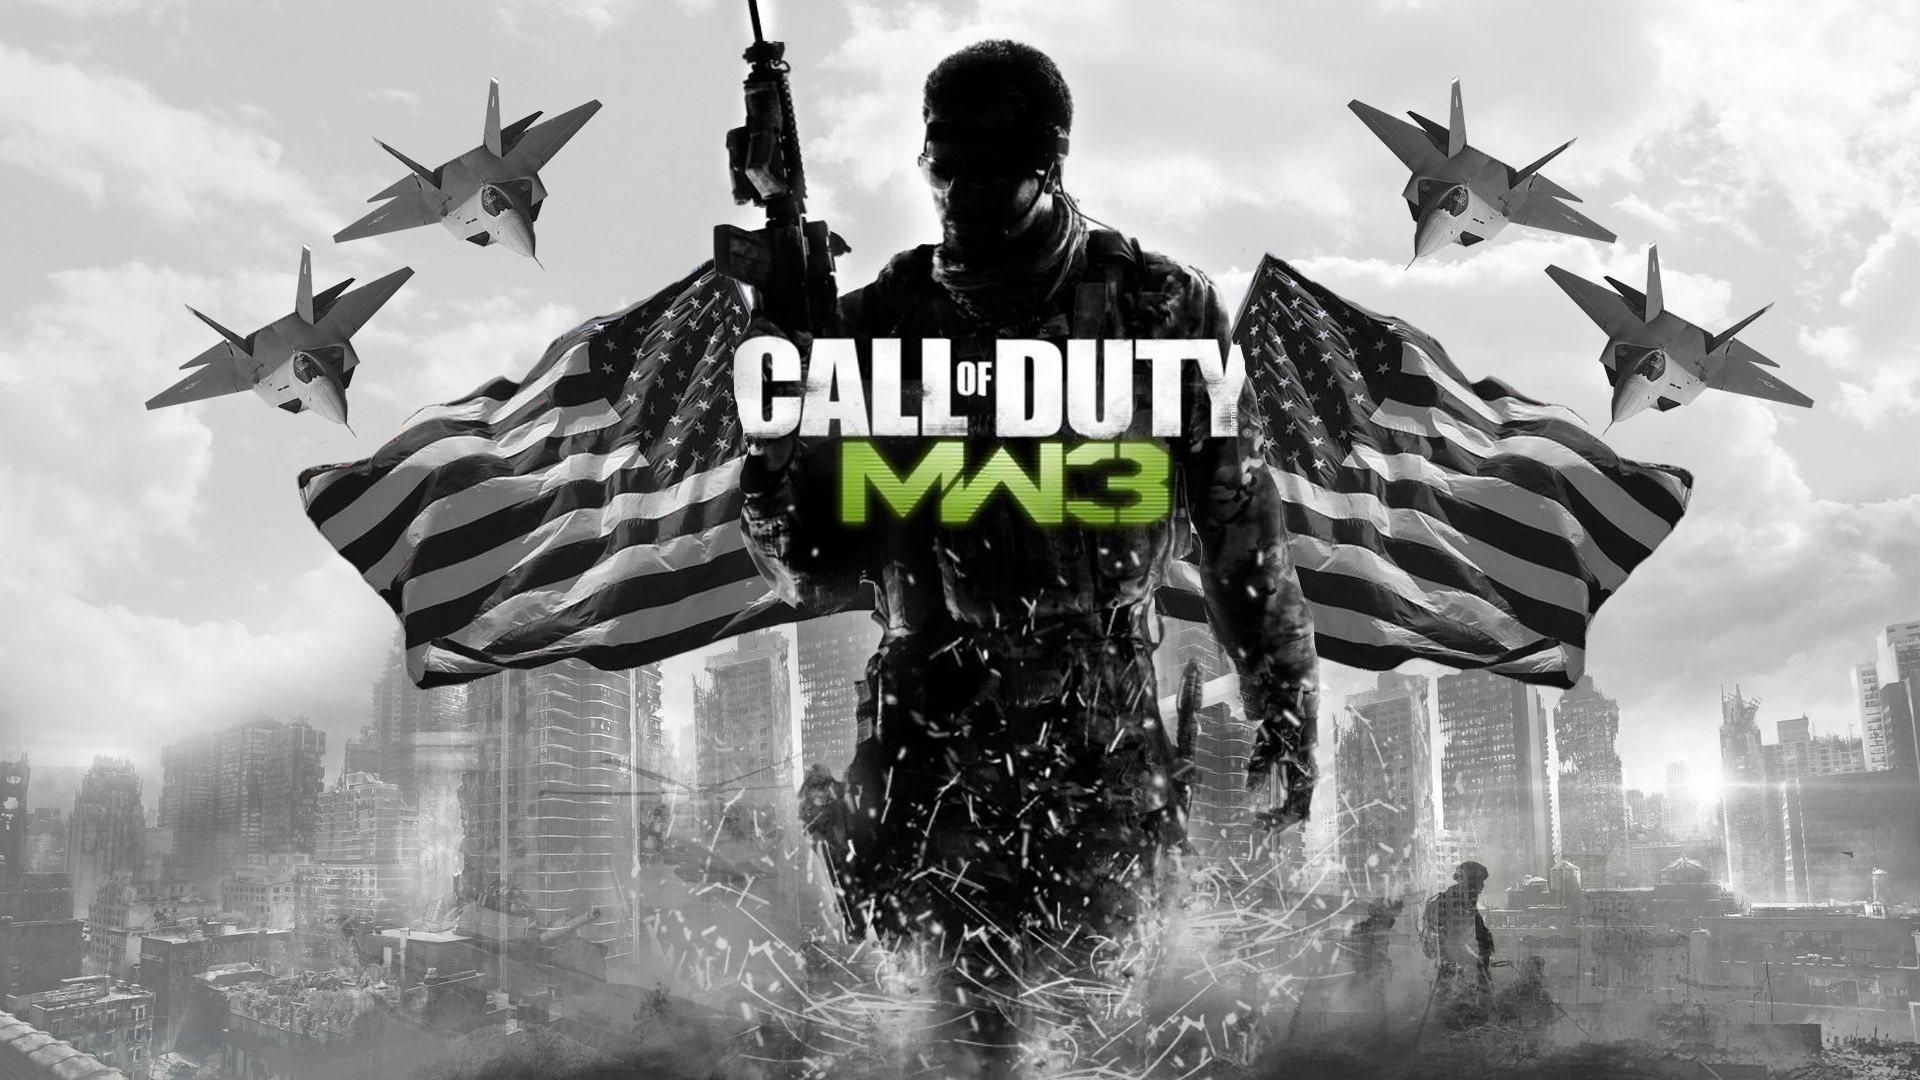 HD Quality War Game Call of Duty MW3 Wallpapers 5 Full Size